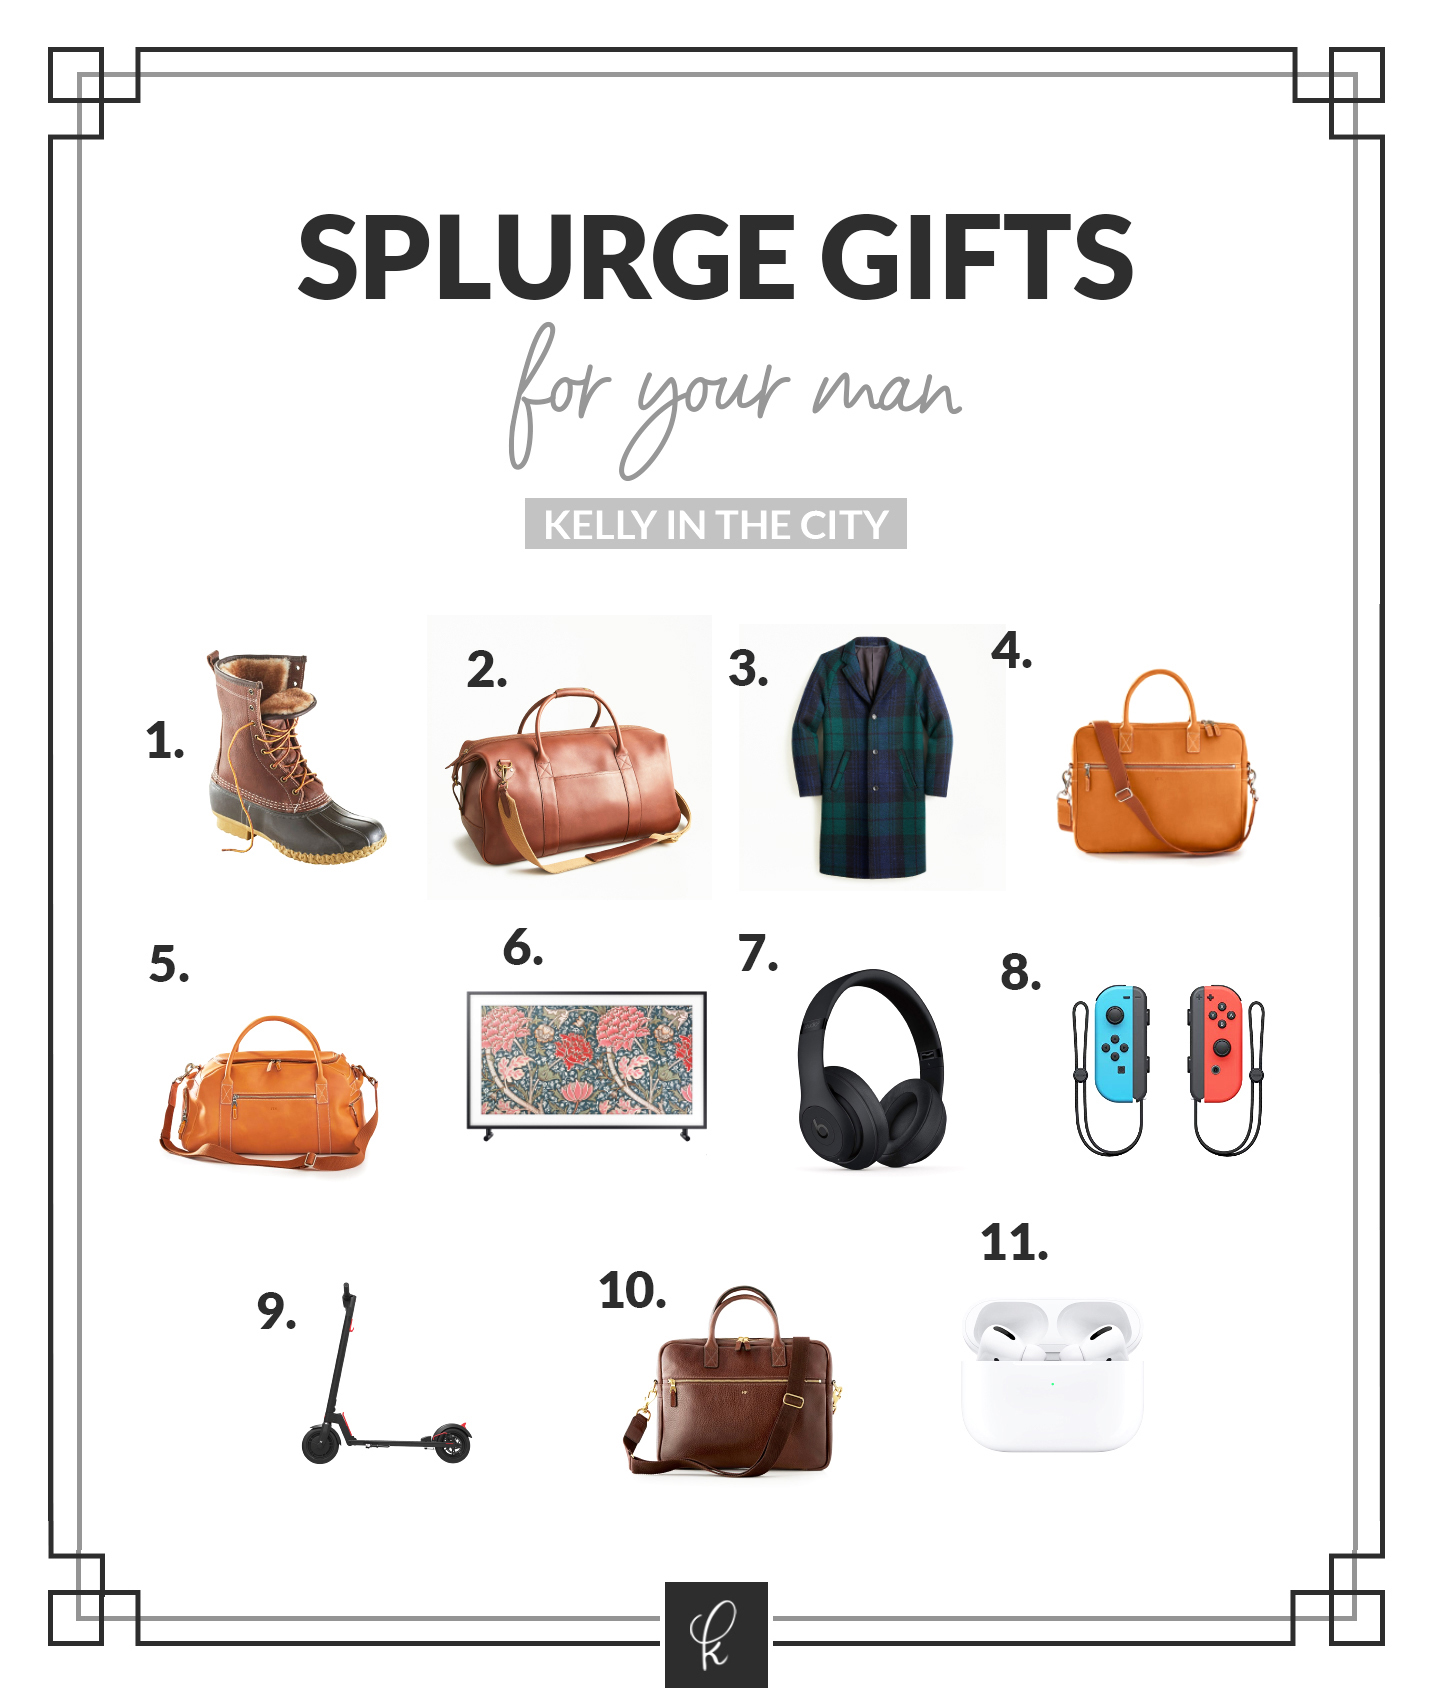 Cyber Monday Deals + gifts for your man